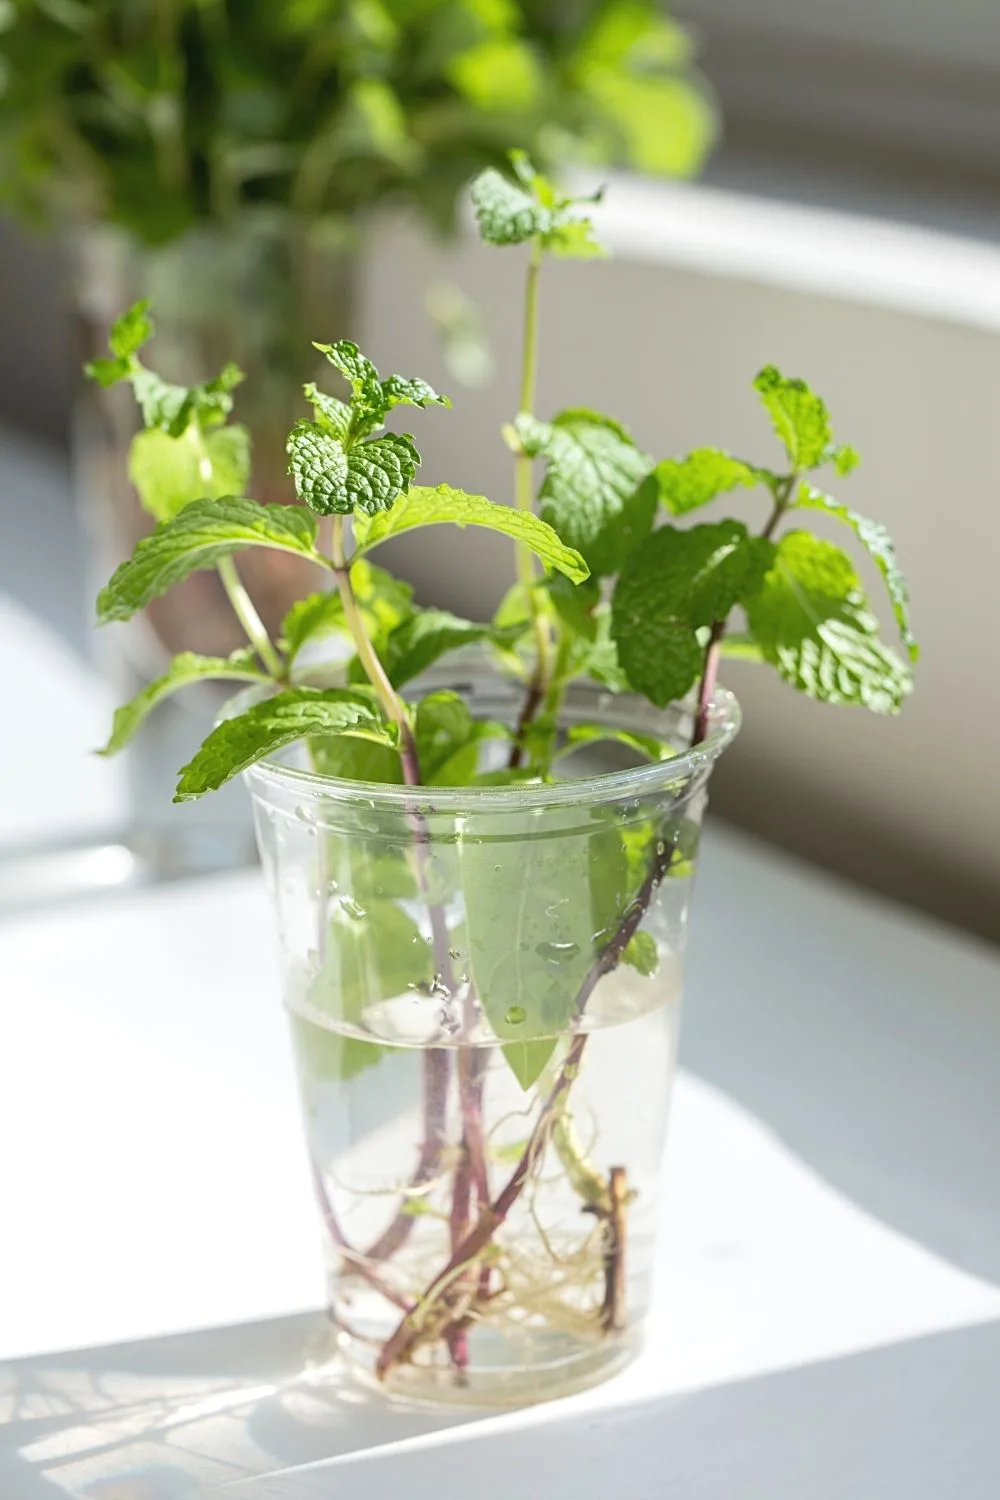 Mint is one of the herbs that you can grow at home in water